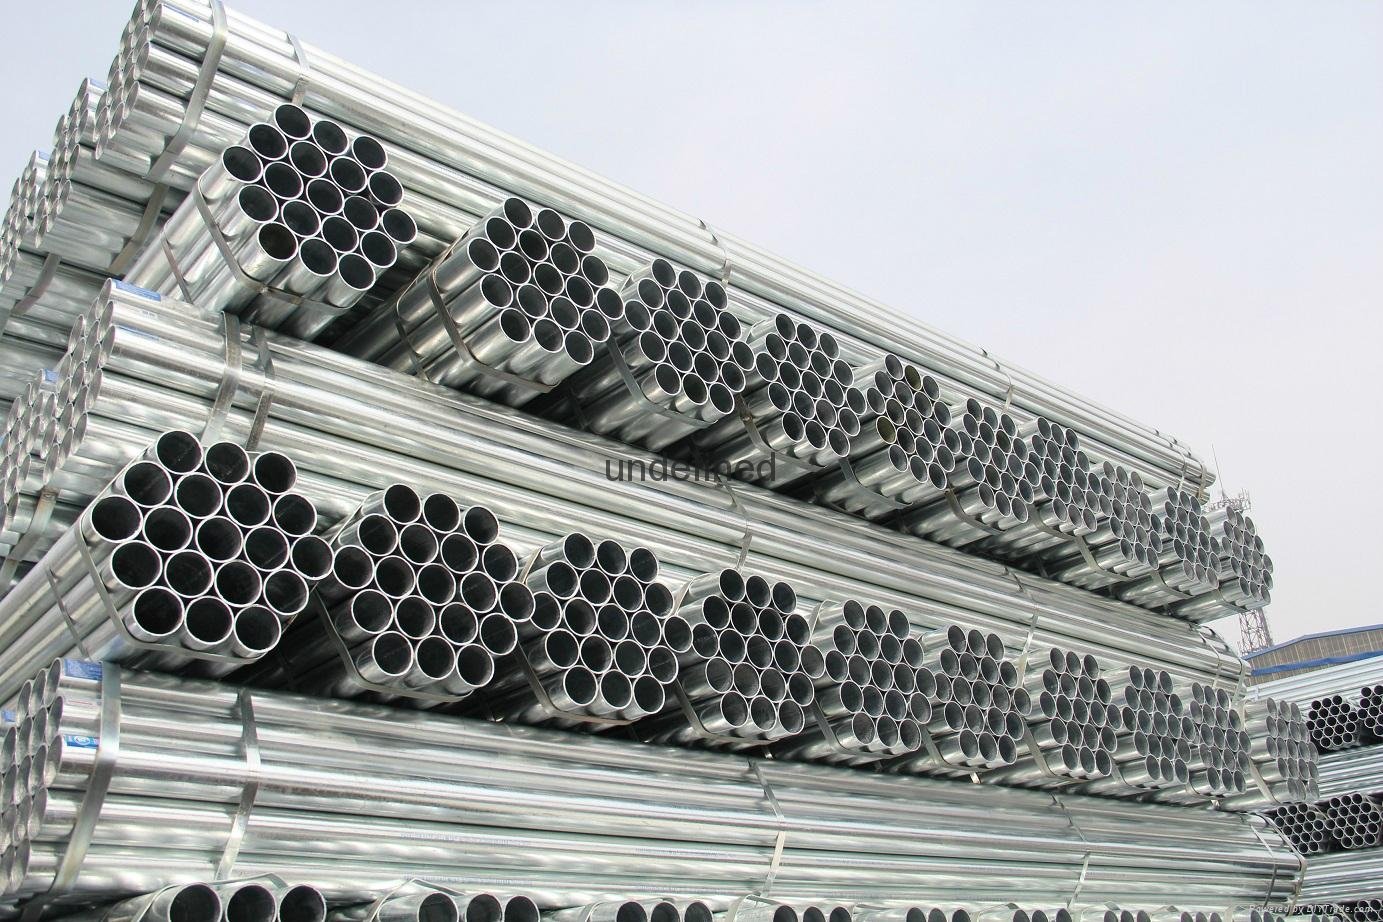  ERW GI Round Steel Pipes